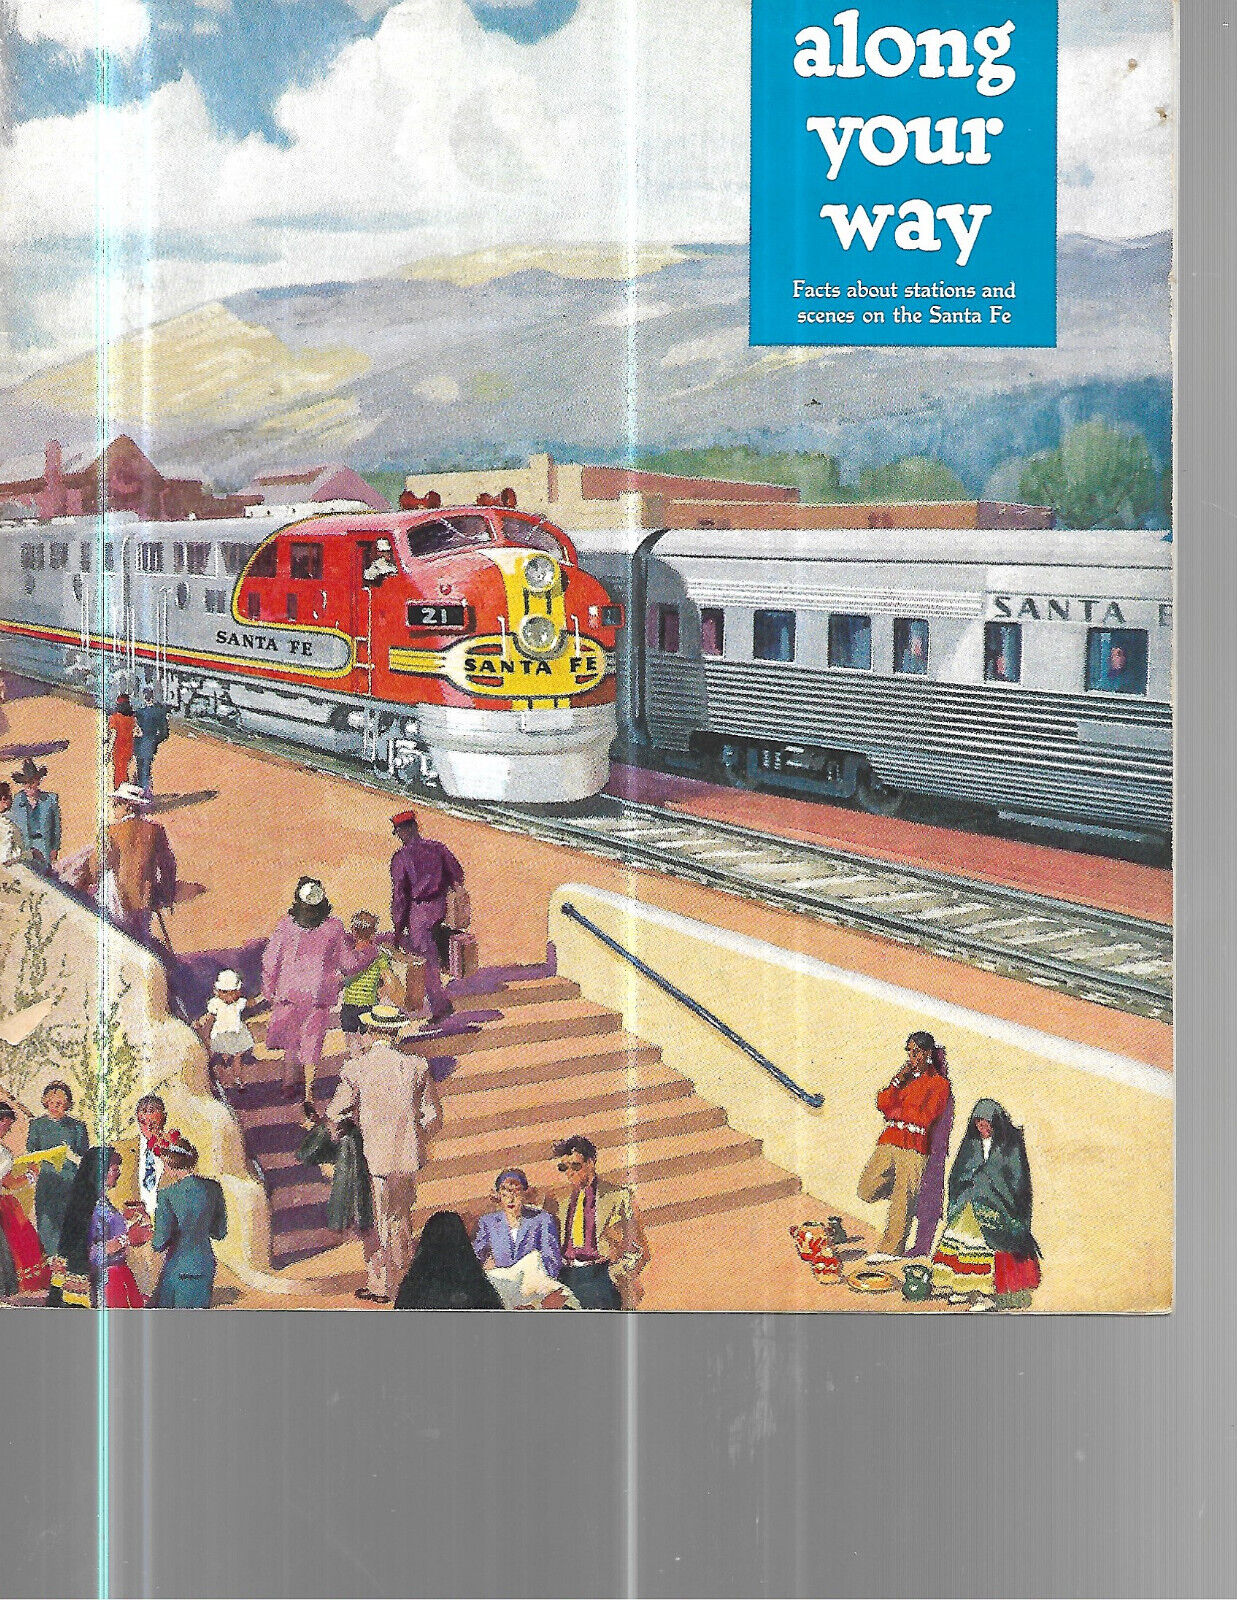 ATSF SANTA FE  4  EMPLOYEE MAG + ALONG YOUR WAY 11952 ROUTE GUIDE